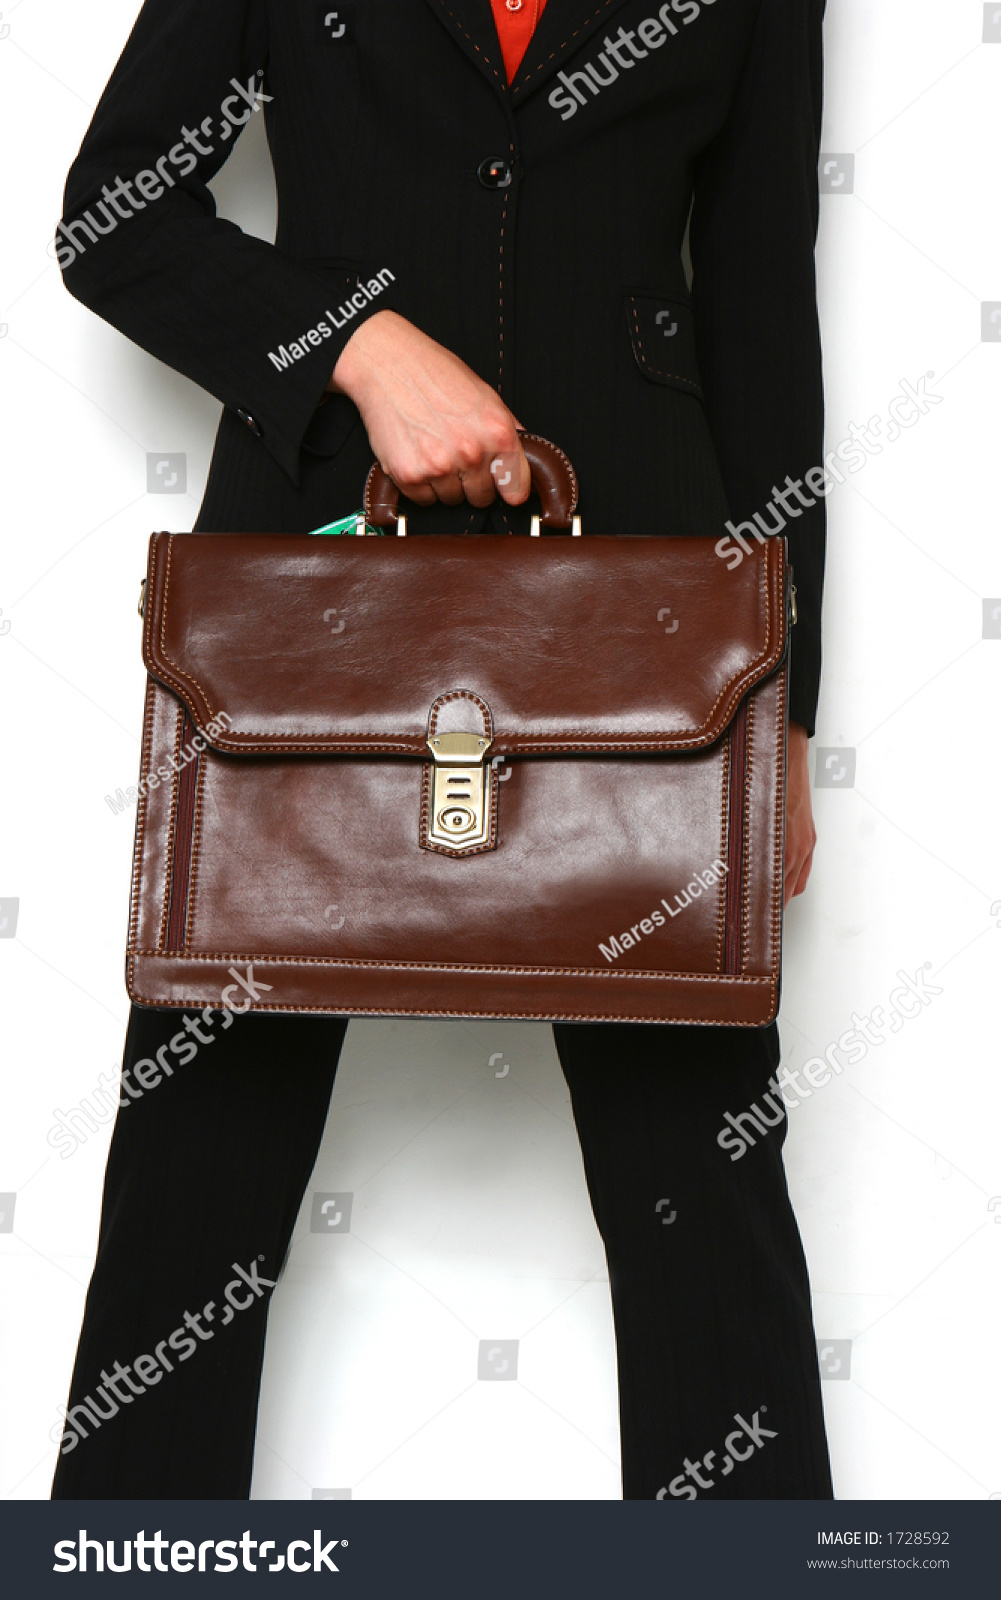 Black Suit Woman With Brown Bag Stock Photo 1728592 : Shutterstock